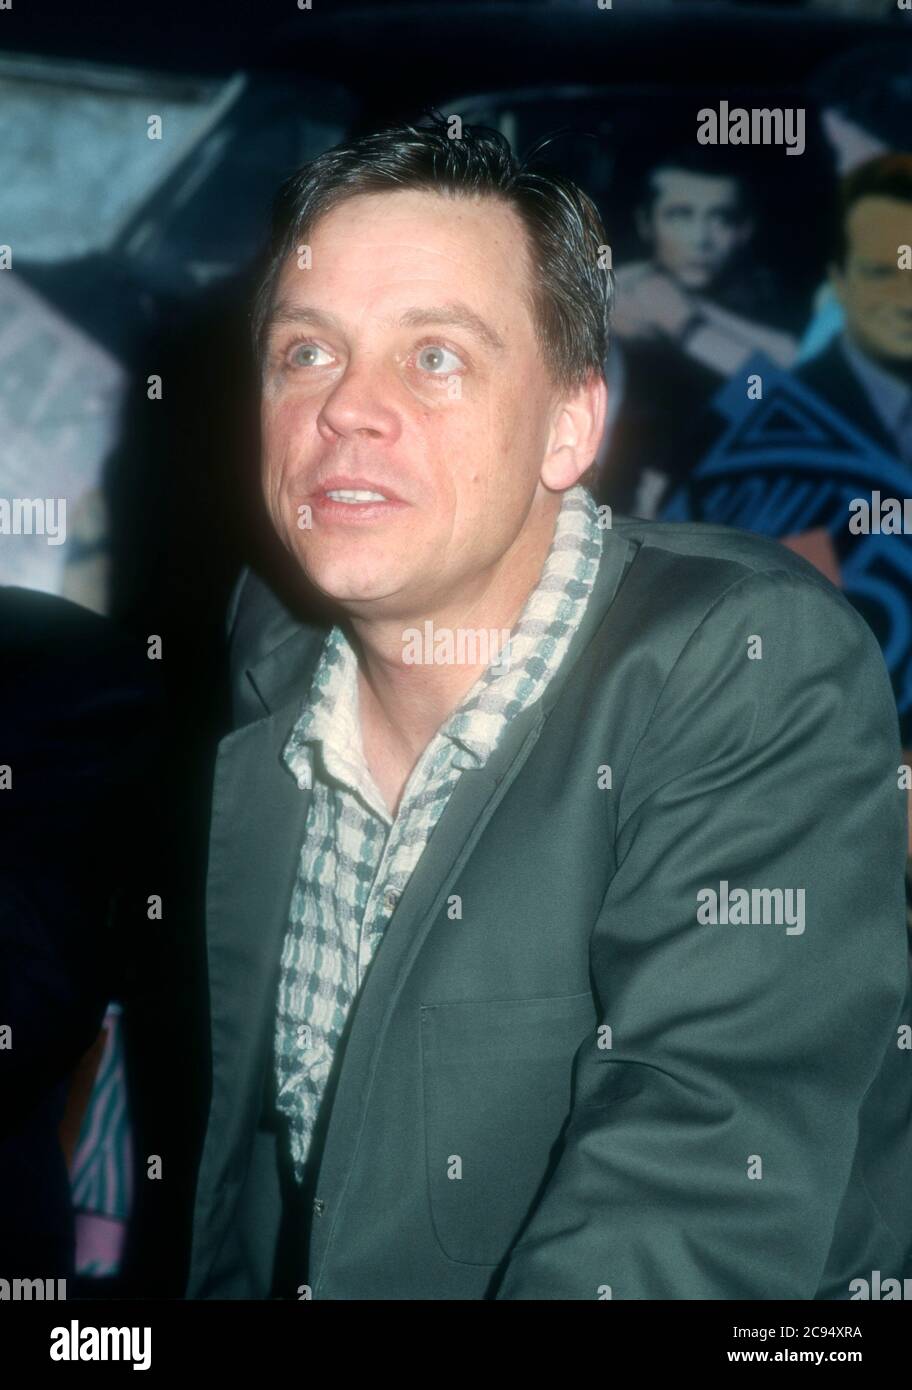 Los Angeles, California, USA 8th February 1996 Actor Mark Hamill attends Wings Commander 4 Costume Presentation on February 8, 1996 at Planet Hollywood in Los Angeles, California, USA. Photo by Barry King/Alamy Stock Photo Stock Photo